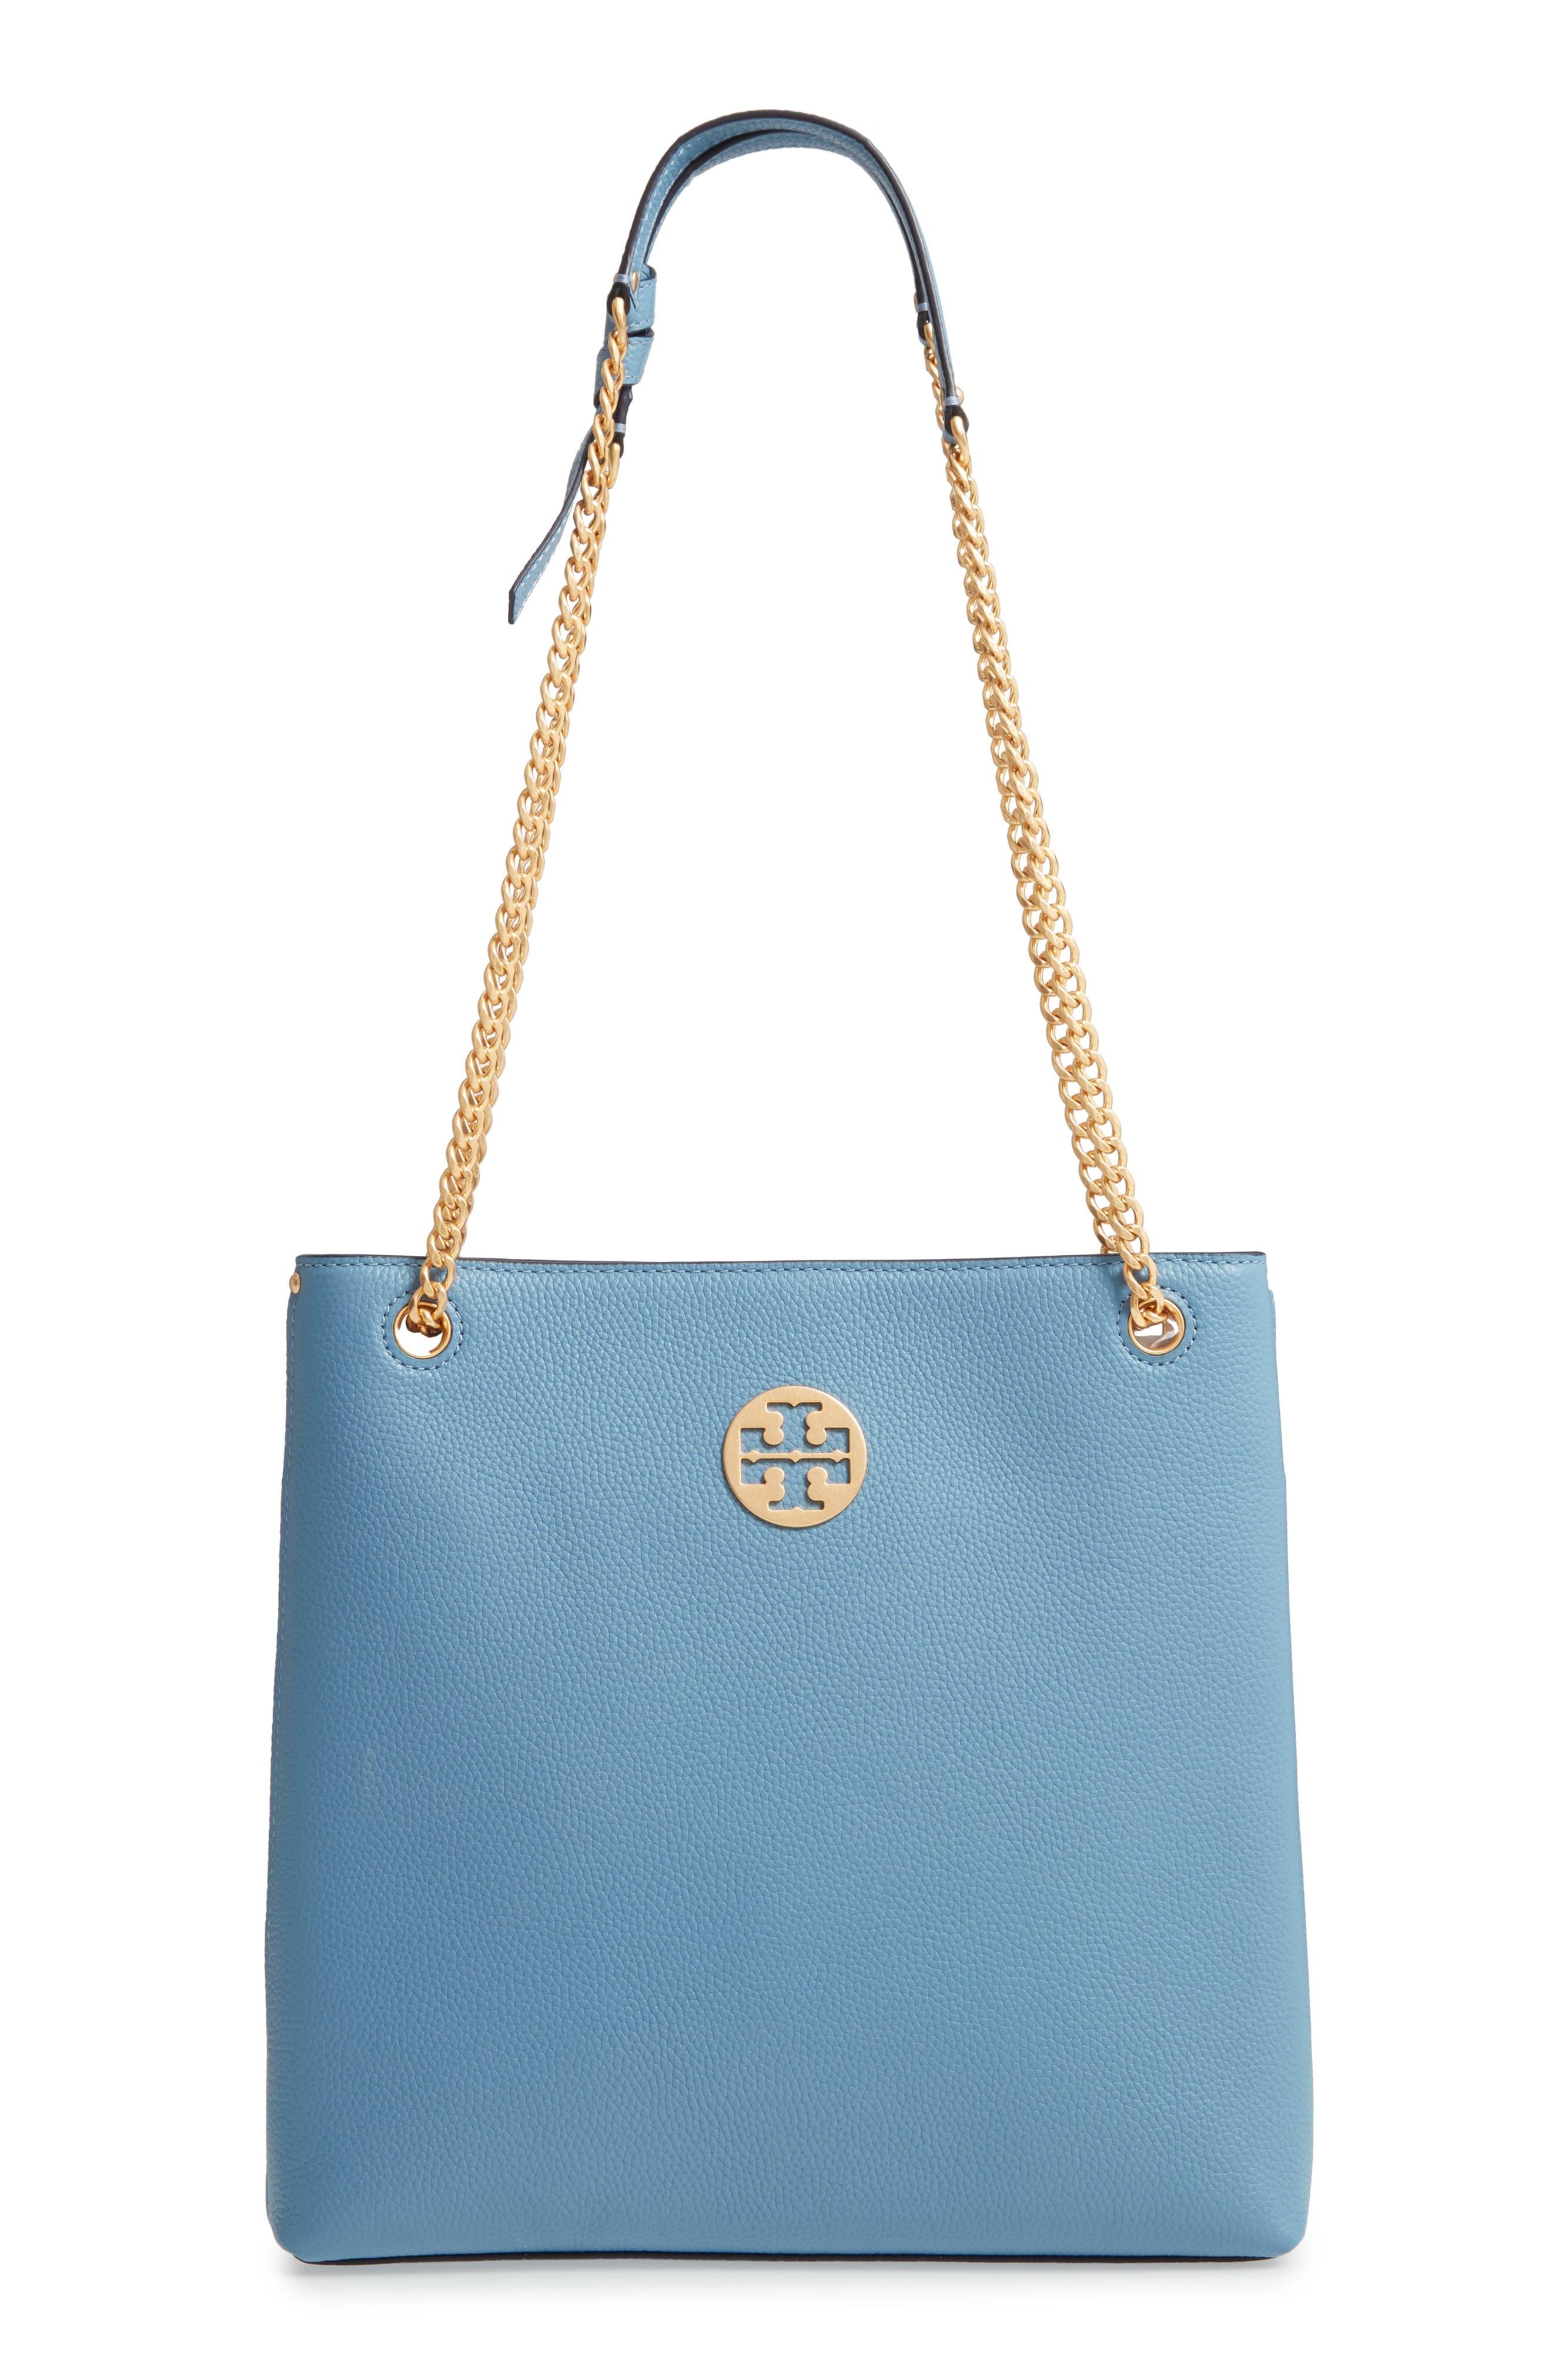 Tory Burch Everly Leather Swingpack in Blue - Lyst